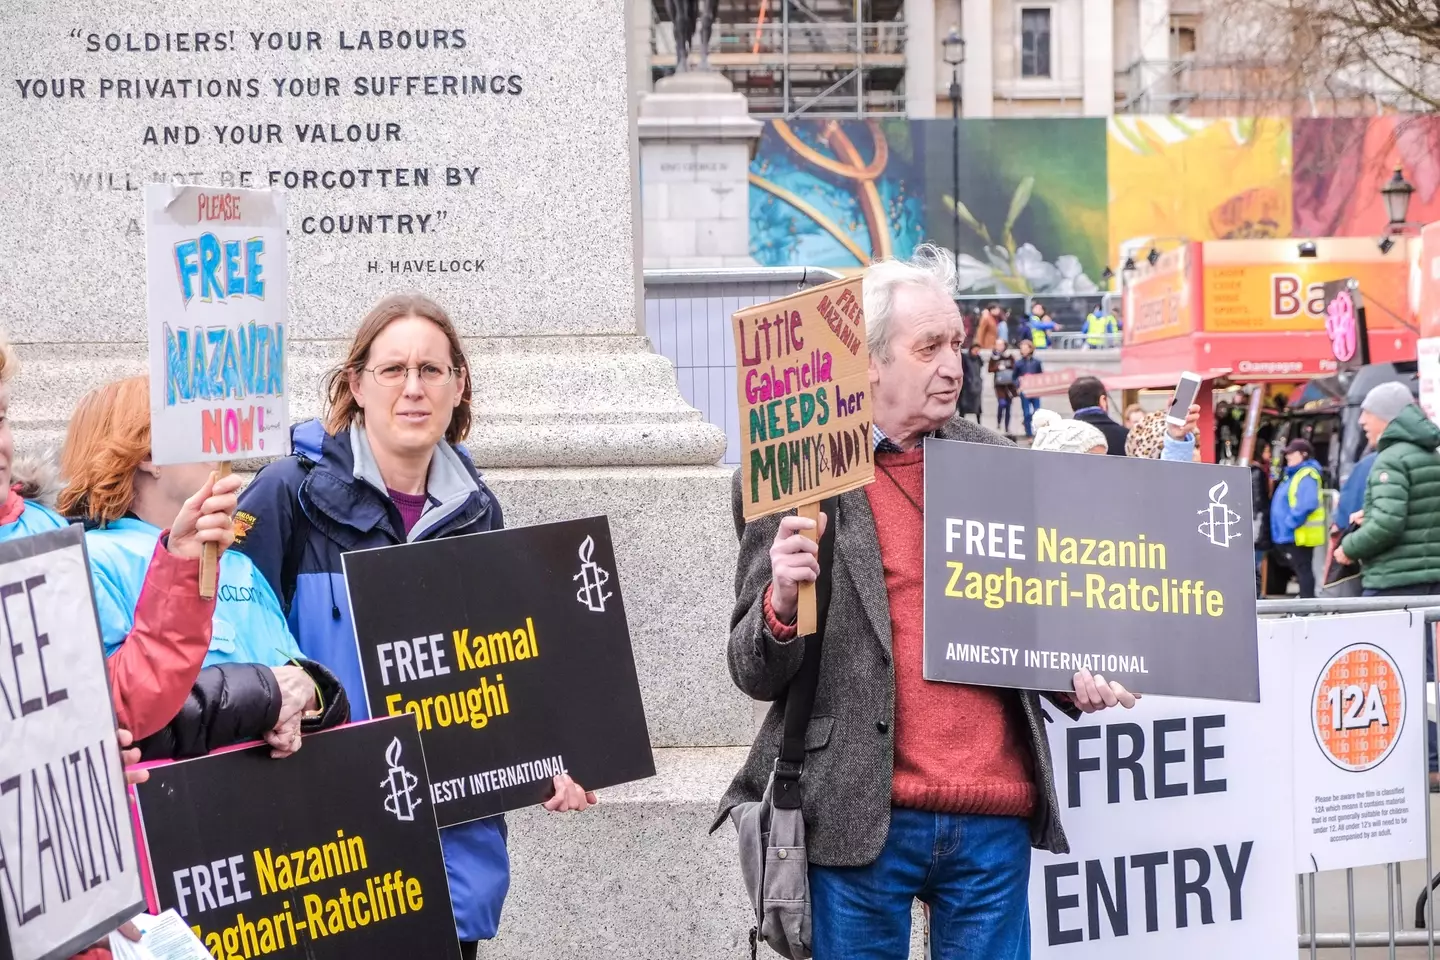 Protest in support of Nazanin Zaghari-Ratcliffe.